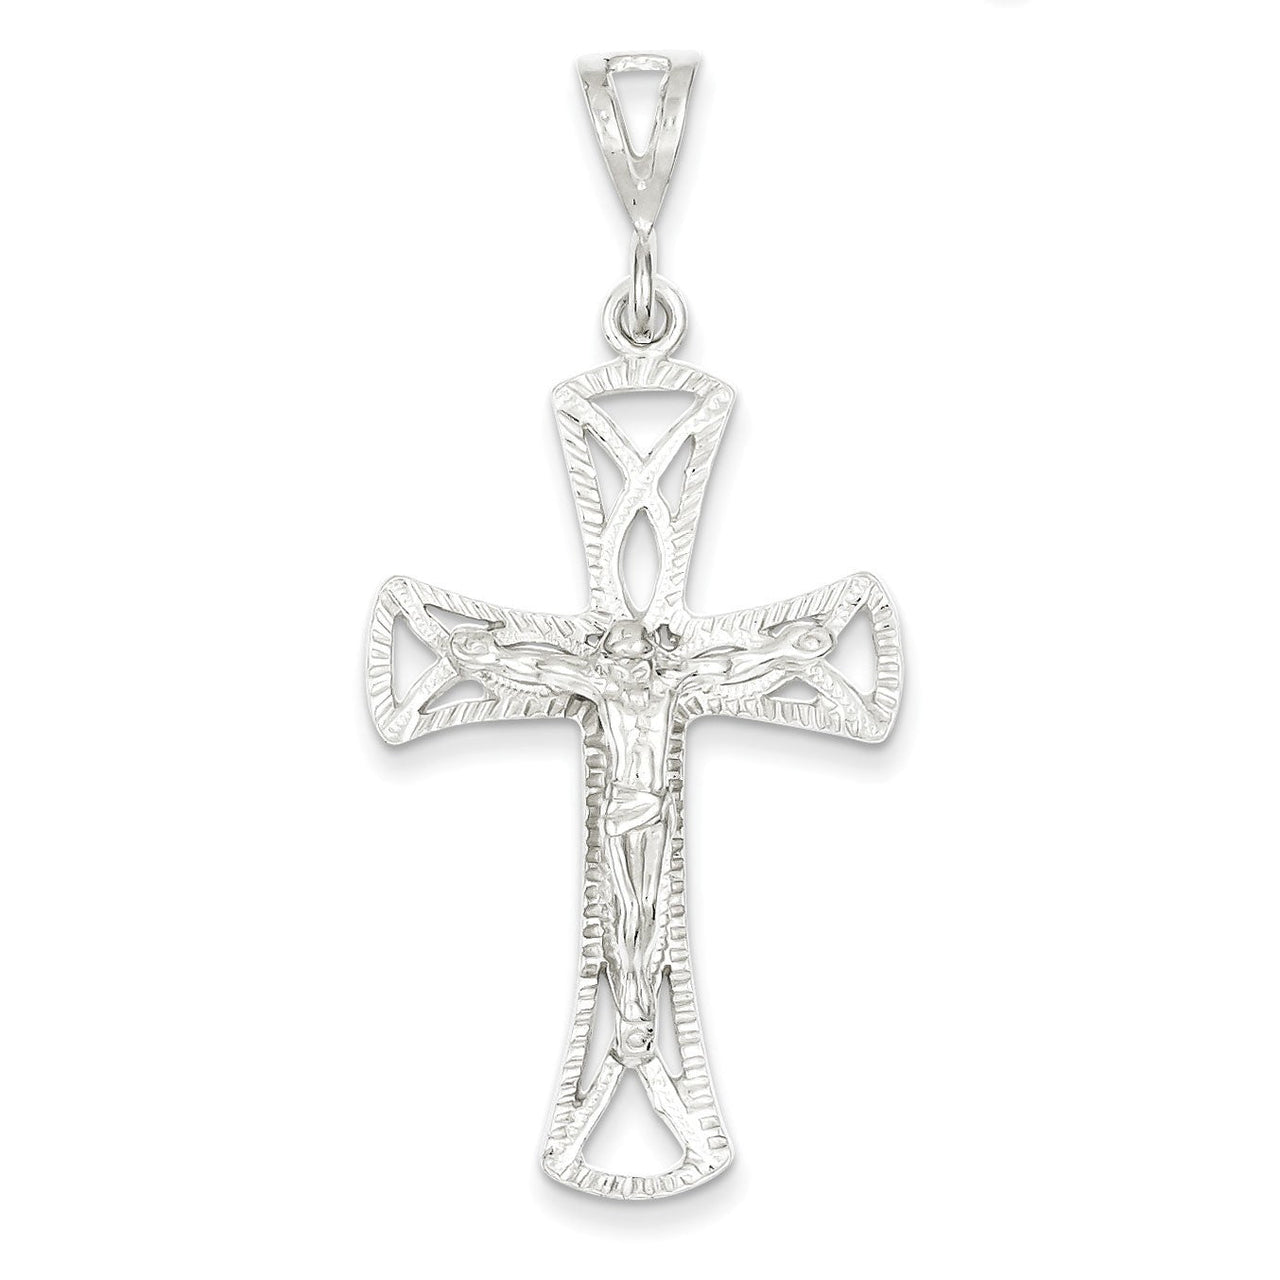 JGFinds Cross Crucifix Charm Pendants - 150 Pack (50 of each), 1 Inch x 1/2  Inch, Antiqued Silver/Bronze/Gold Tone, DIY Jewelry Making Supplies